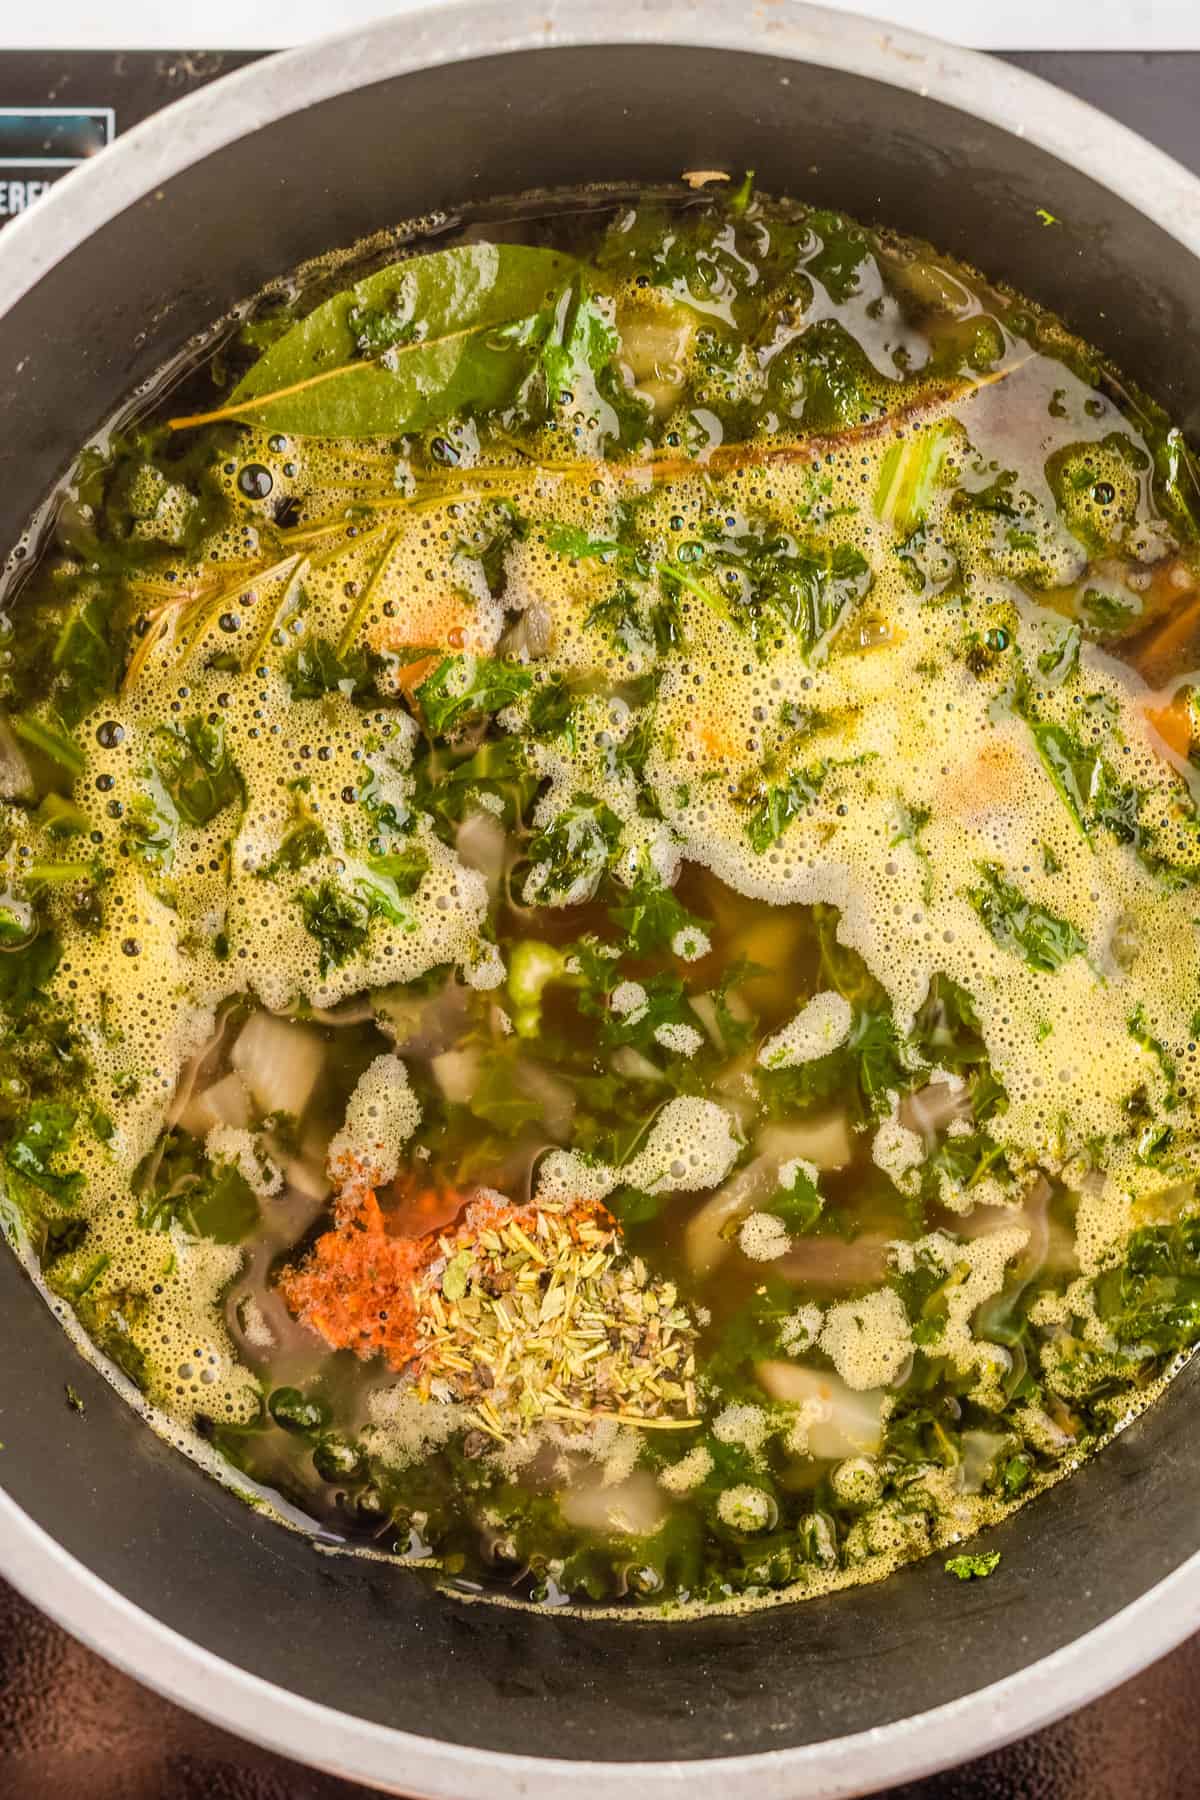 Overhead view of a large pot with boiled shallots, carrots, celery, and chard stalks, garlic, and bouquet garni added with salt, dried oregano and red pepper flakes.